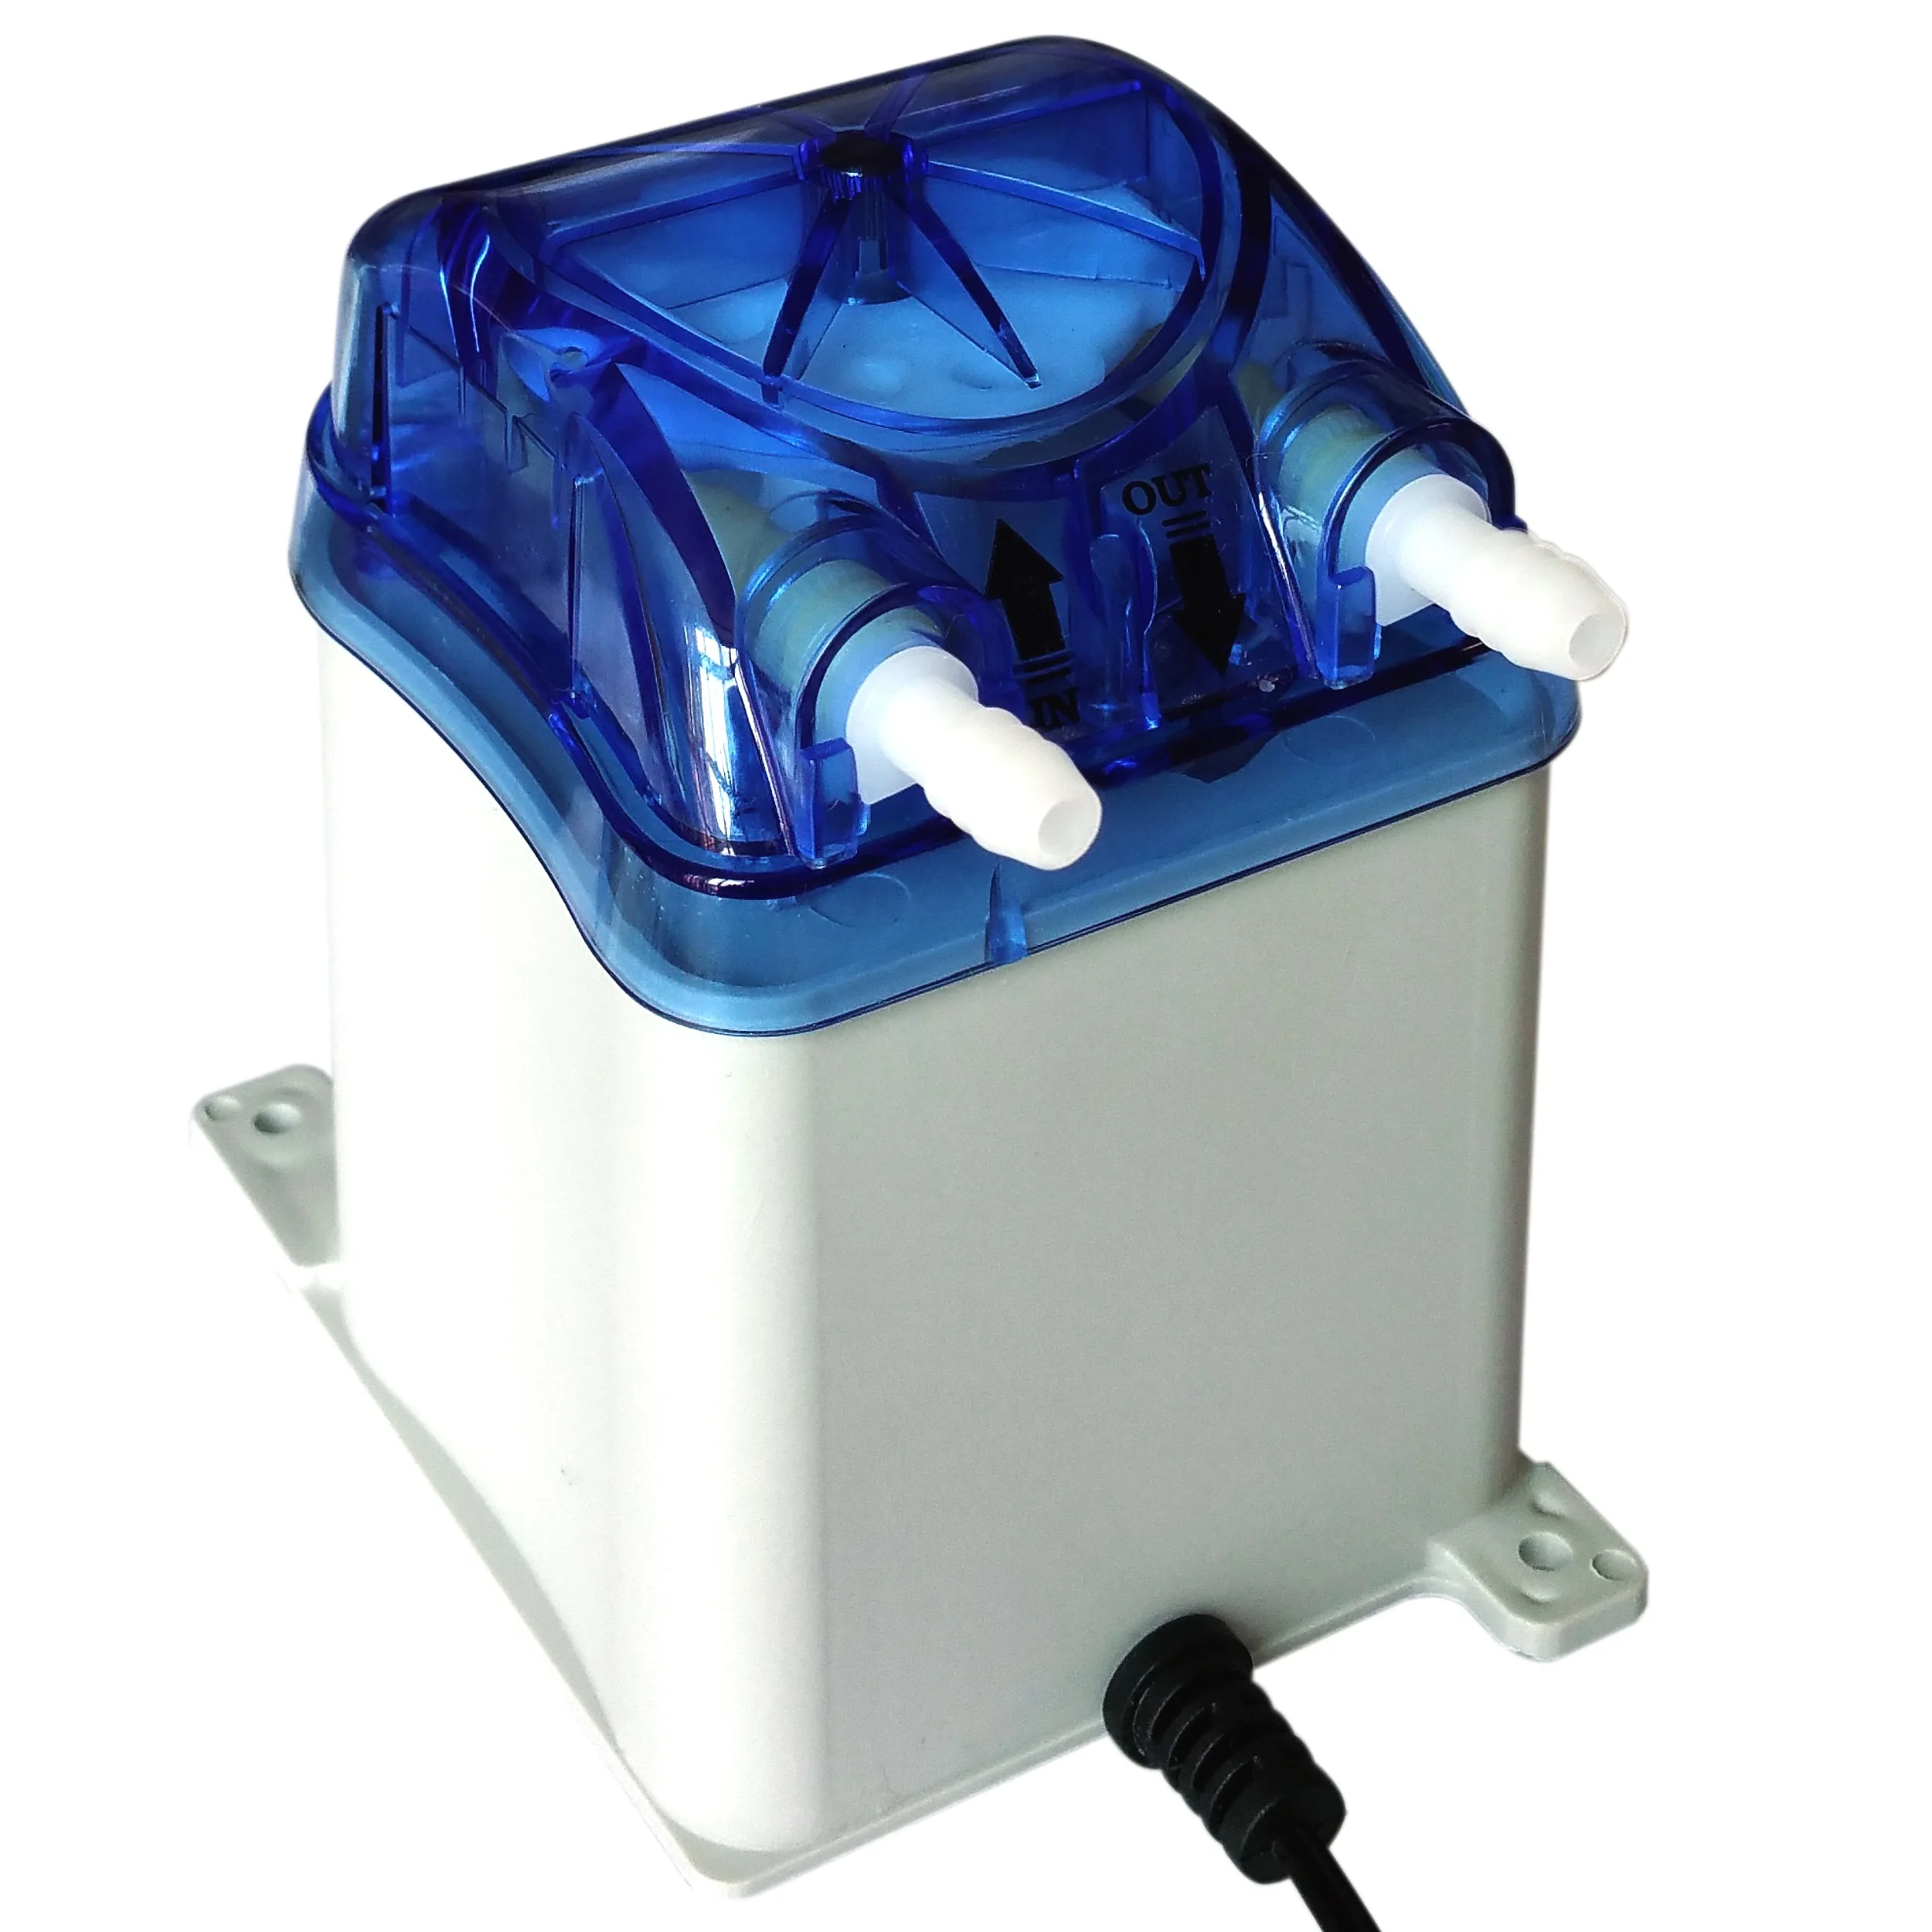 

420ml/min, 3 Rollers, Honlite 24V Peristaltic Pump with Exchangeable Pump Head and PharMed BPT Peristaltic Tube